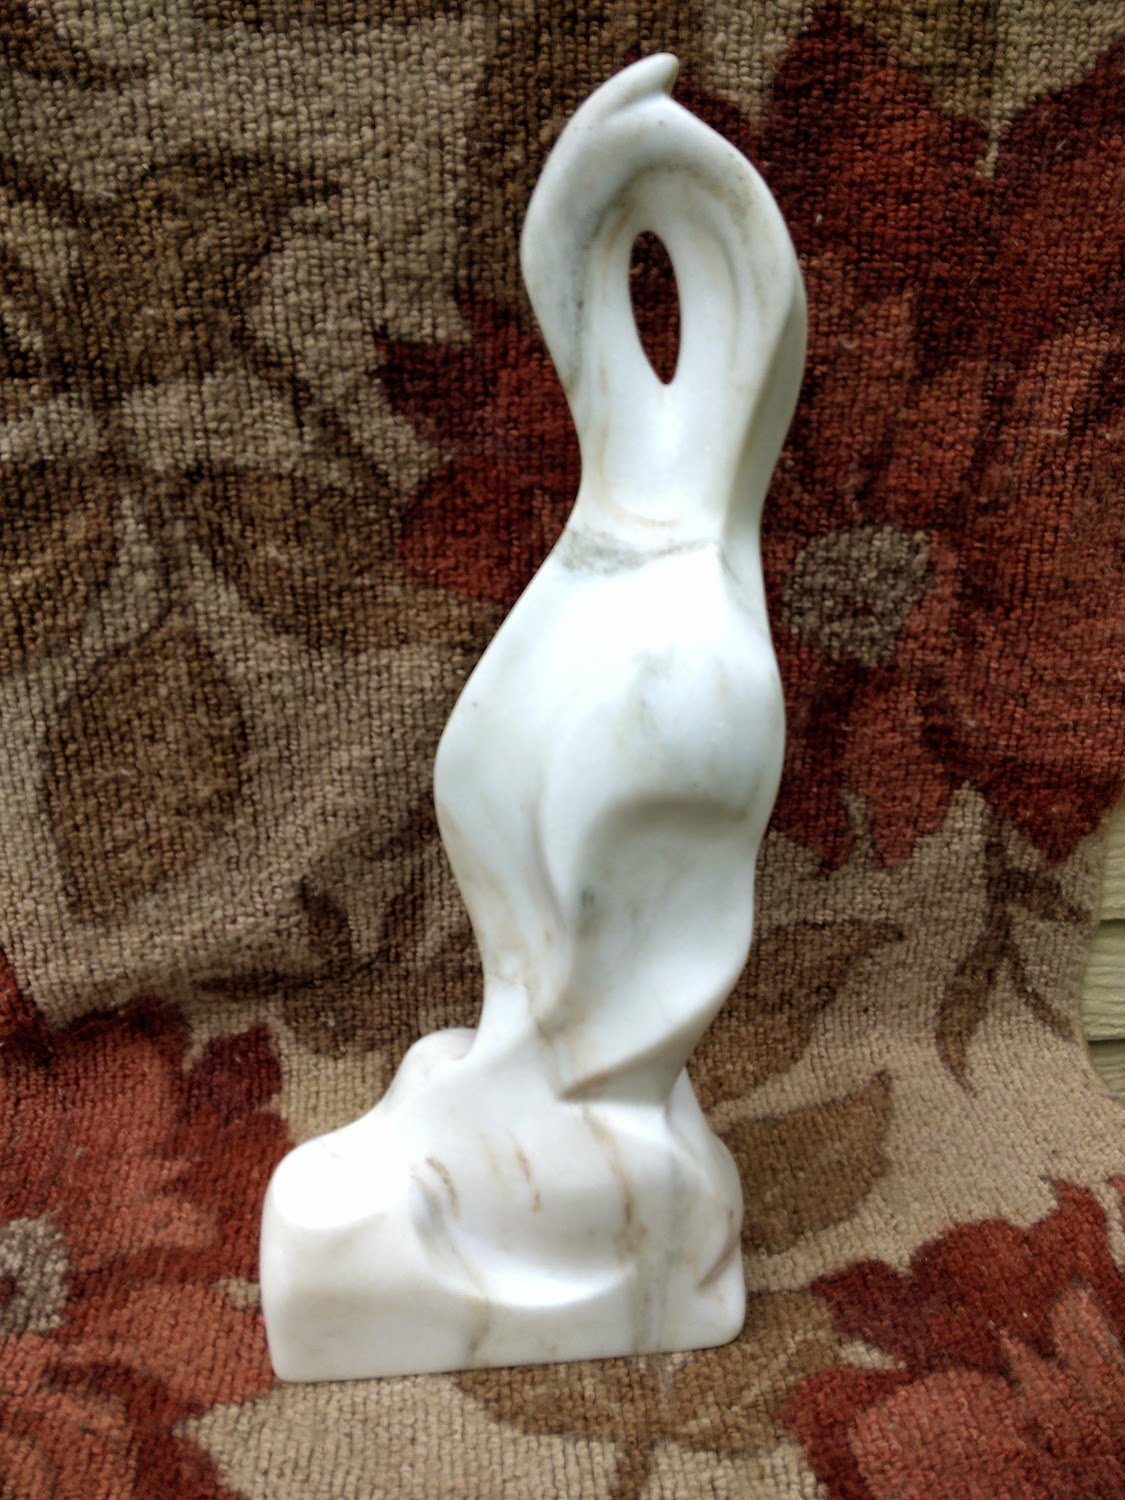   Mark T. Brophy ,  Earth Dance , vermont marble, 24x10x4 1/2 